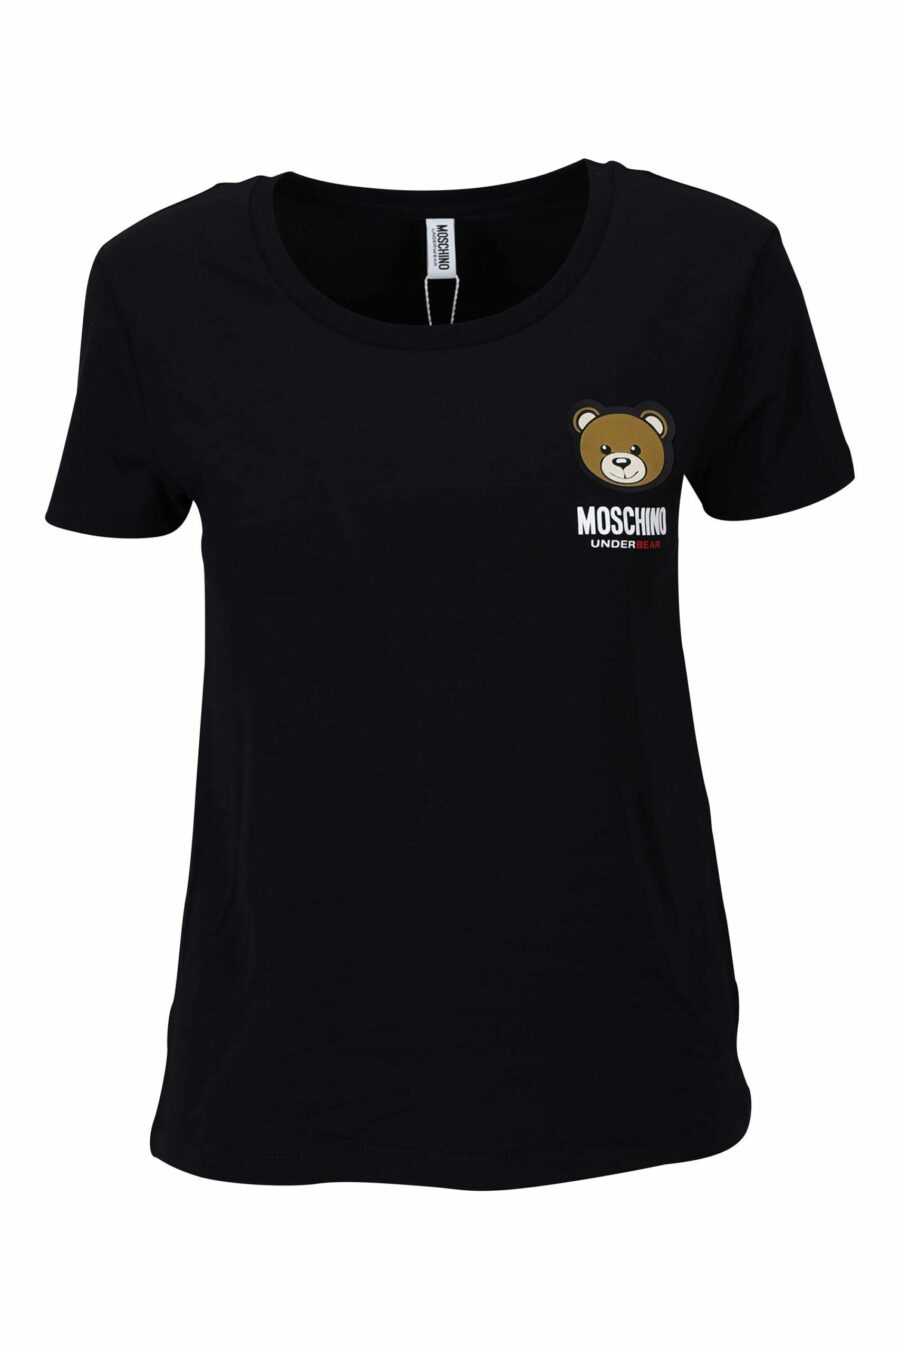 Black T-shirt with logo bear patch "underbear" - 667113034348 scaled